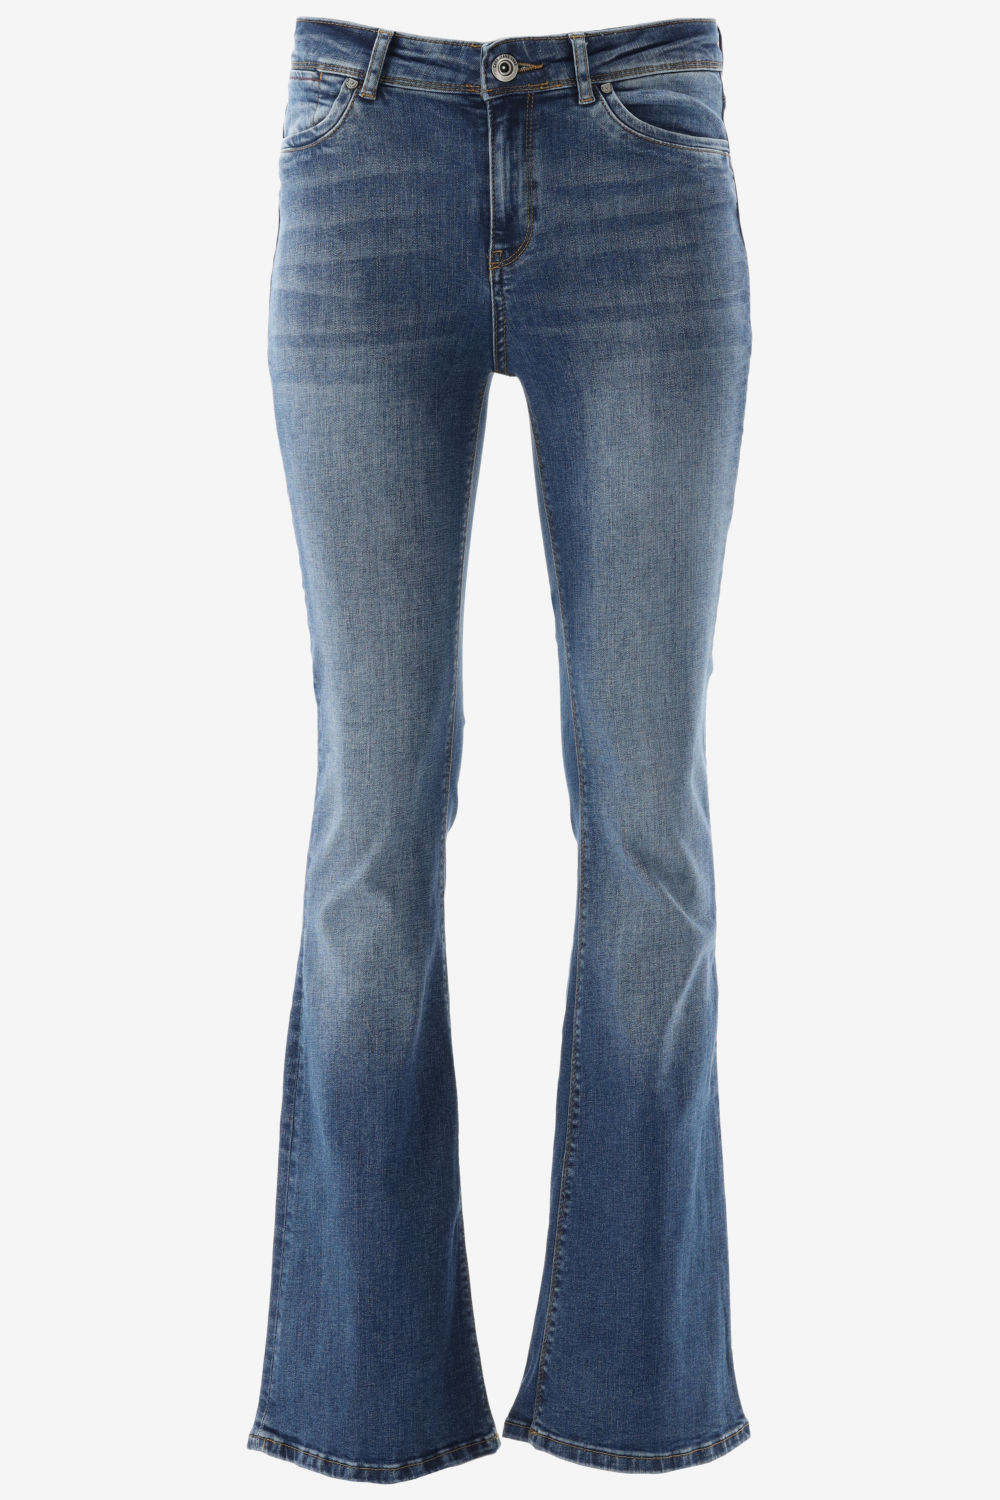 Cars Jeans Michelle Flare Den 78627 Stone Used Dames Maat - W27 X L30